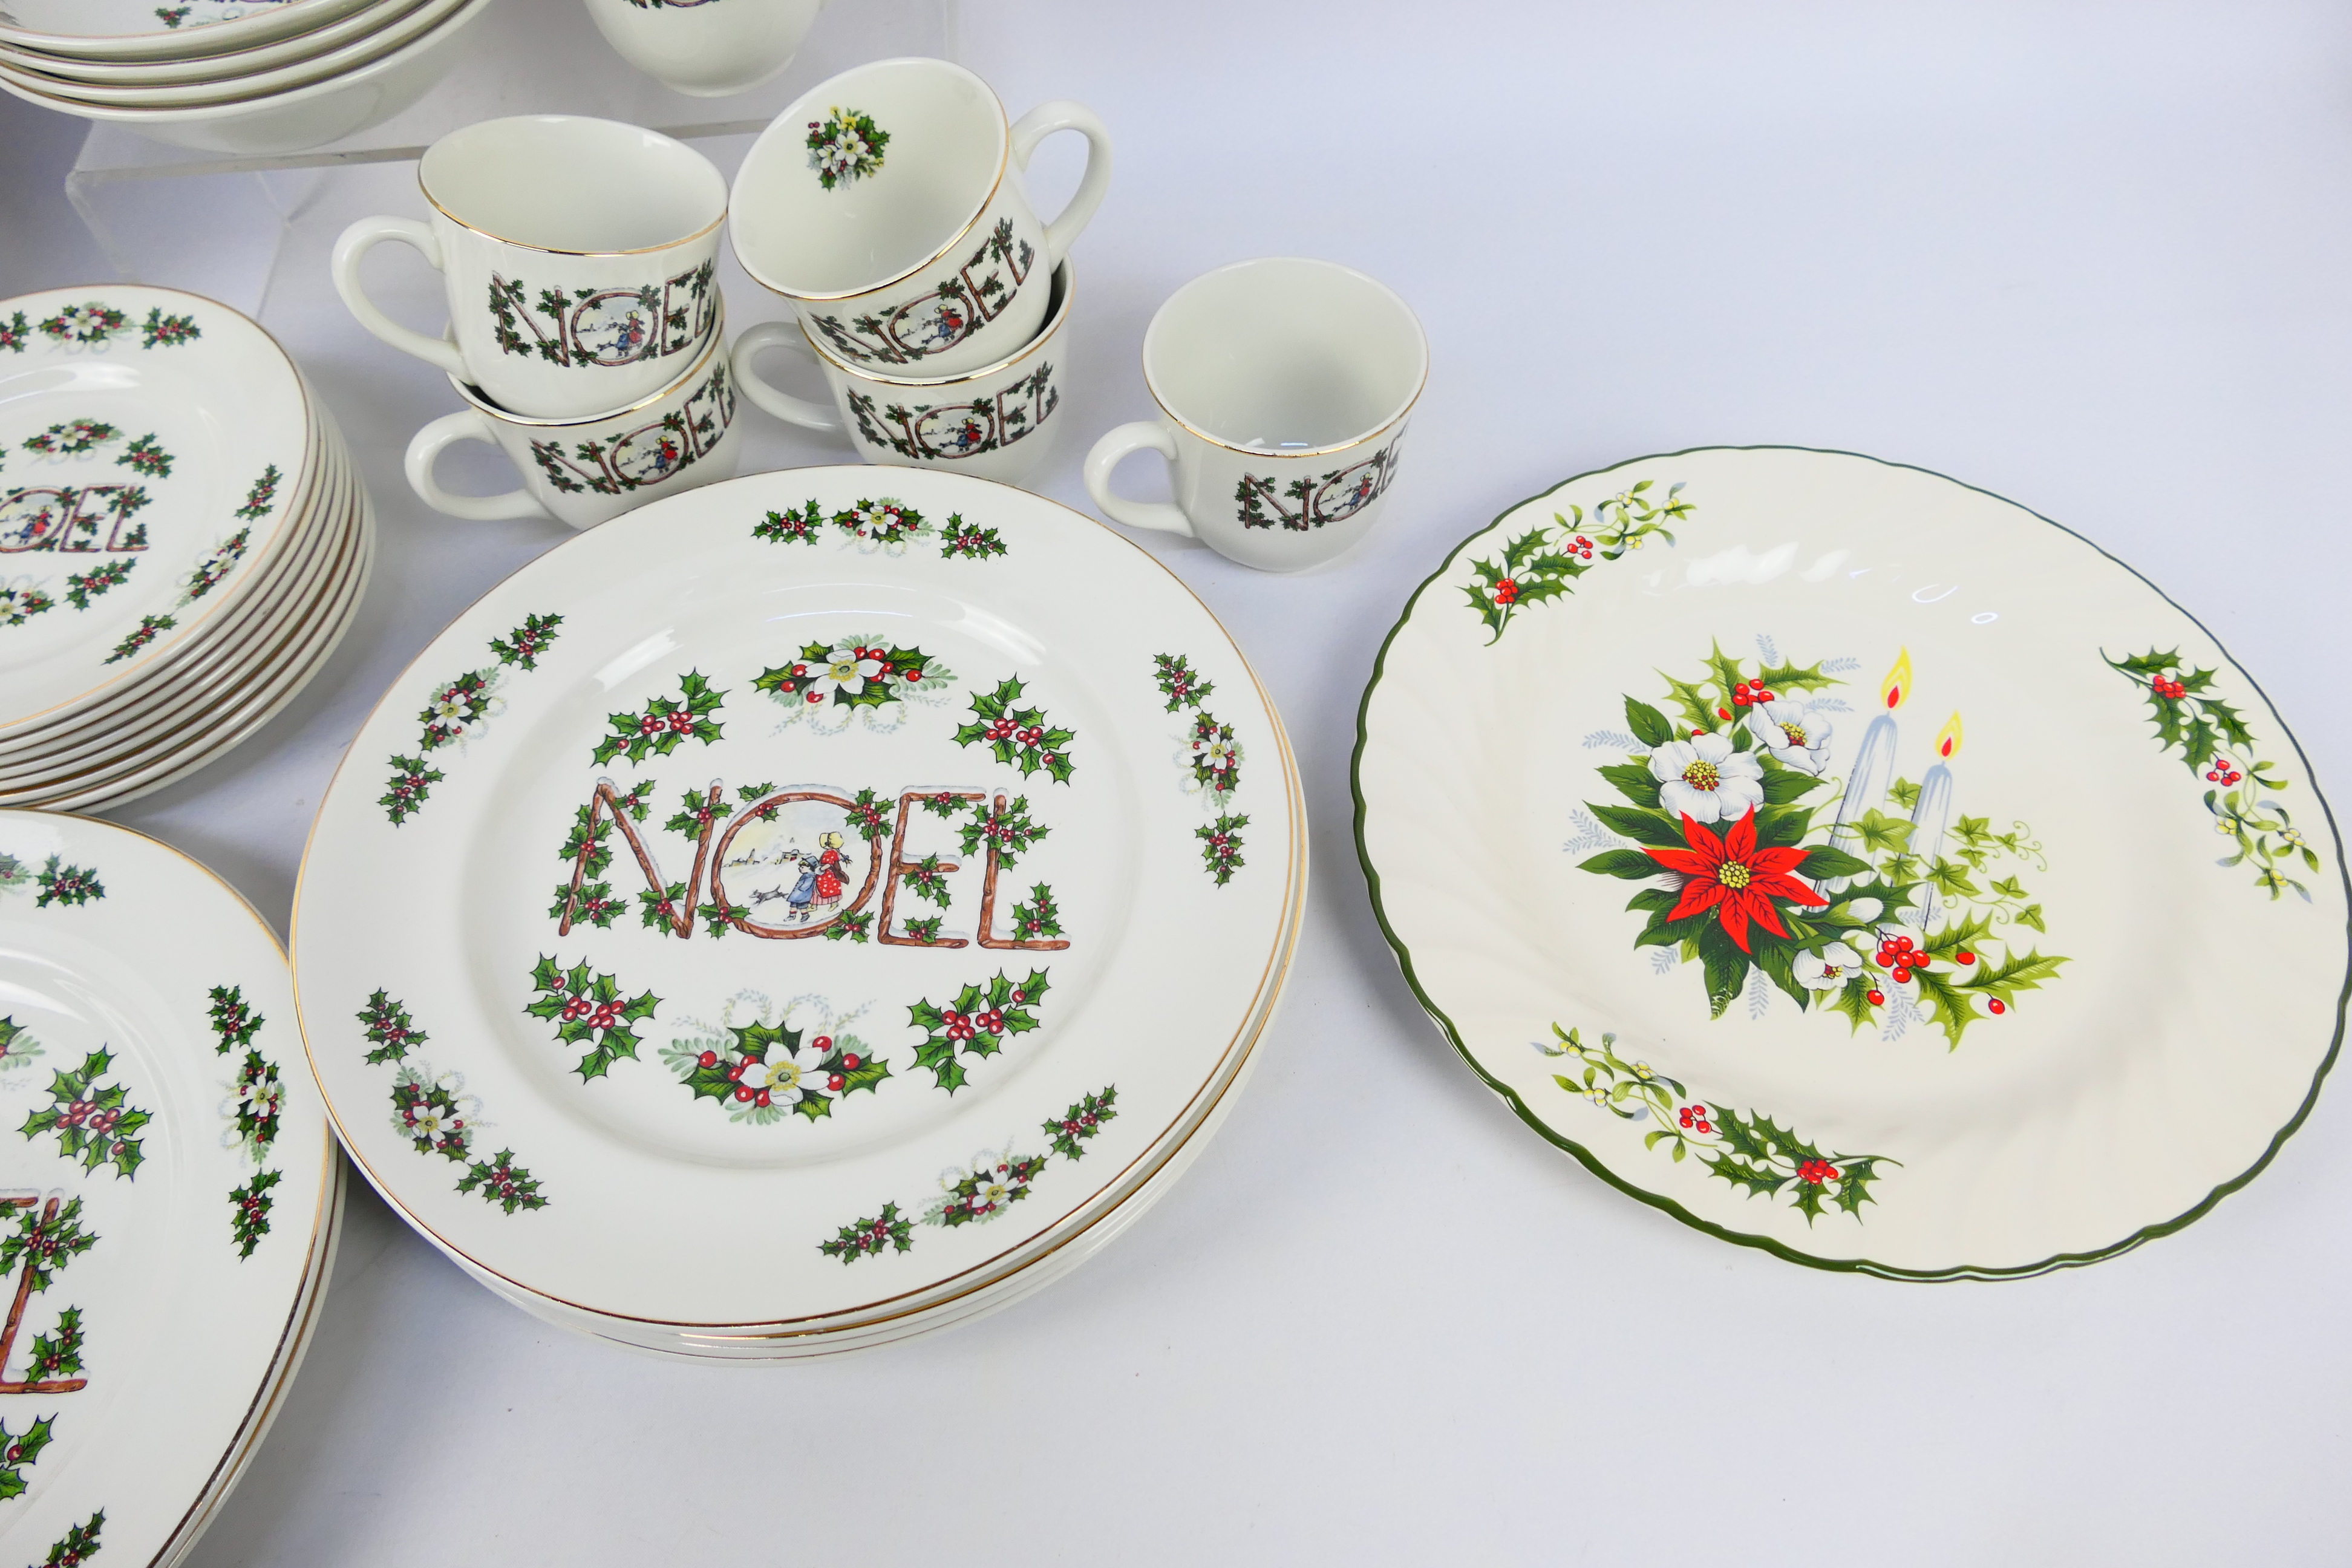 Noel By Wood and Sons, Baratts - A Noel ceramic tea service with holly patterns - Lot includes cups, - Image 4 of 7